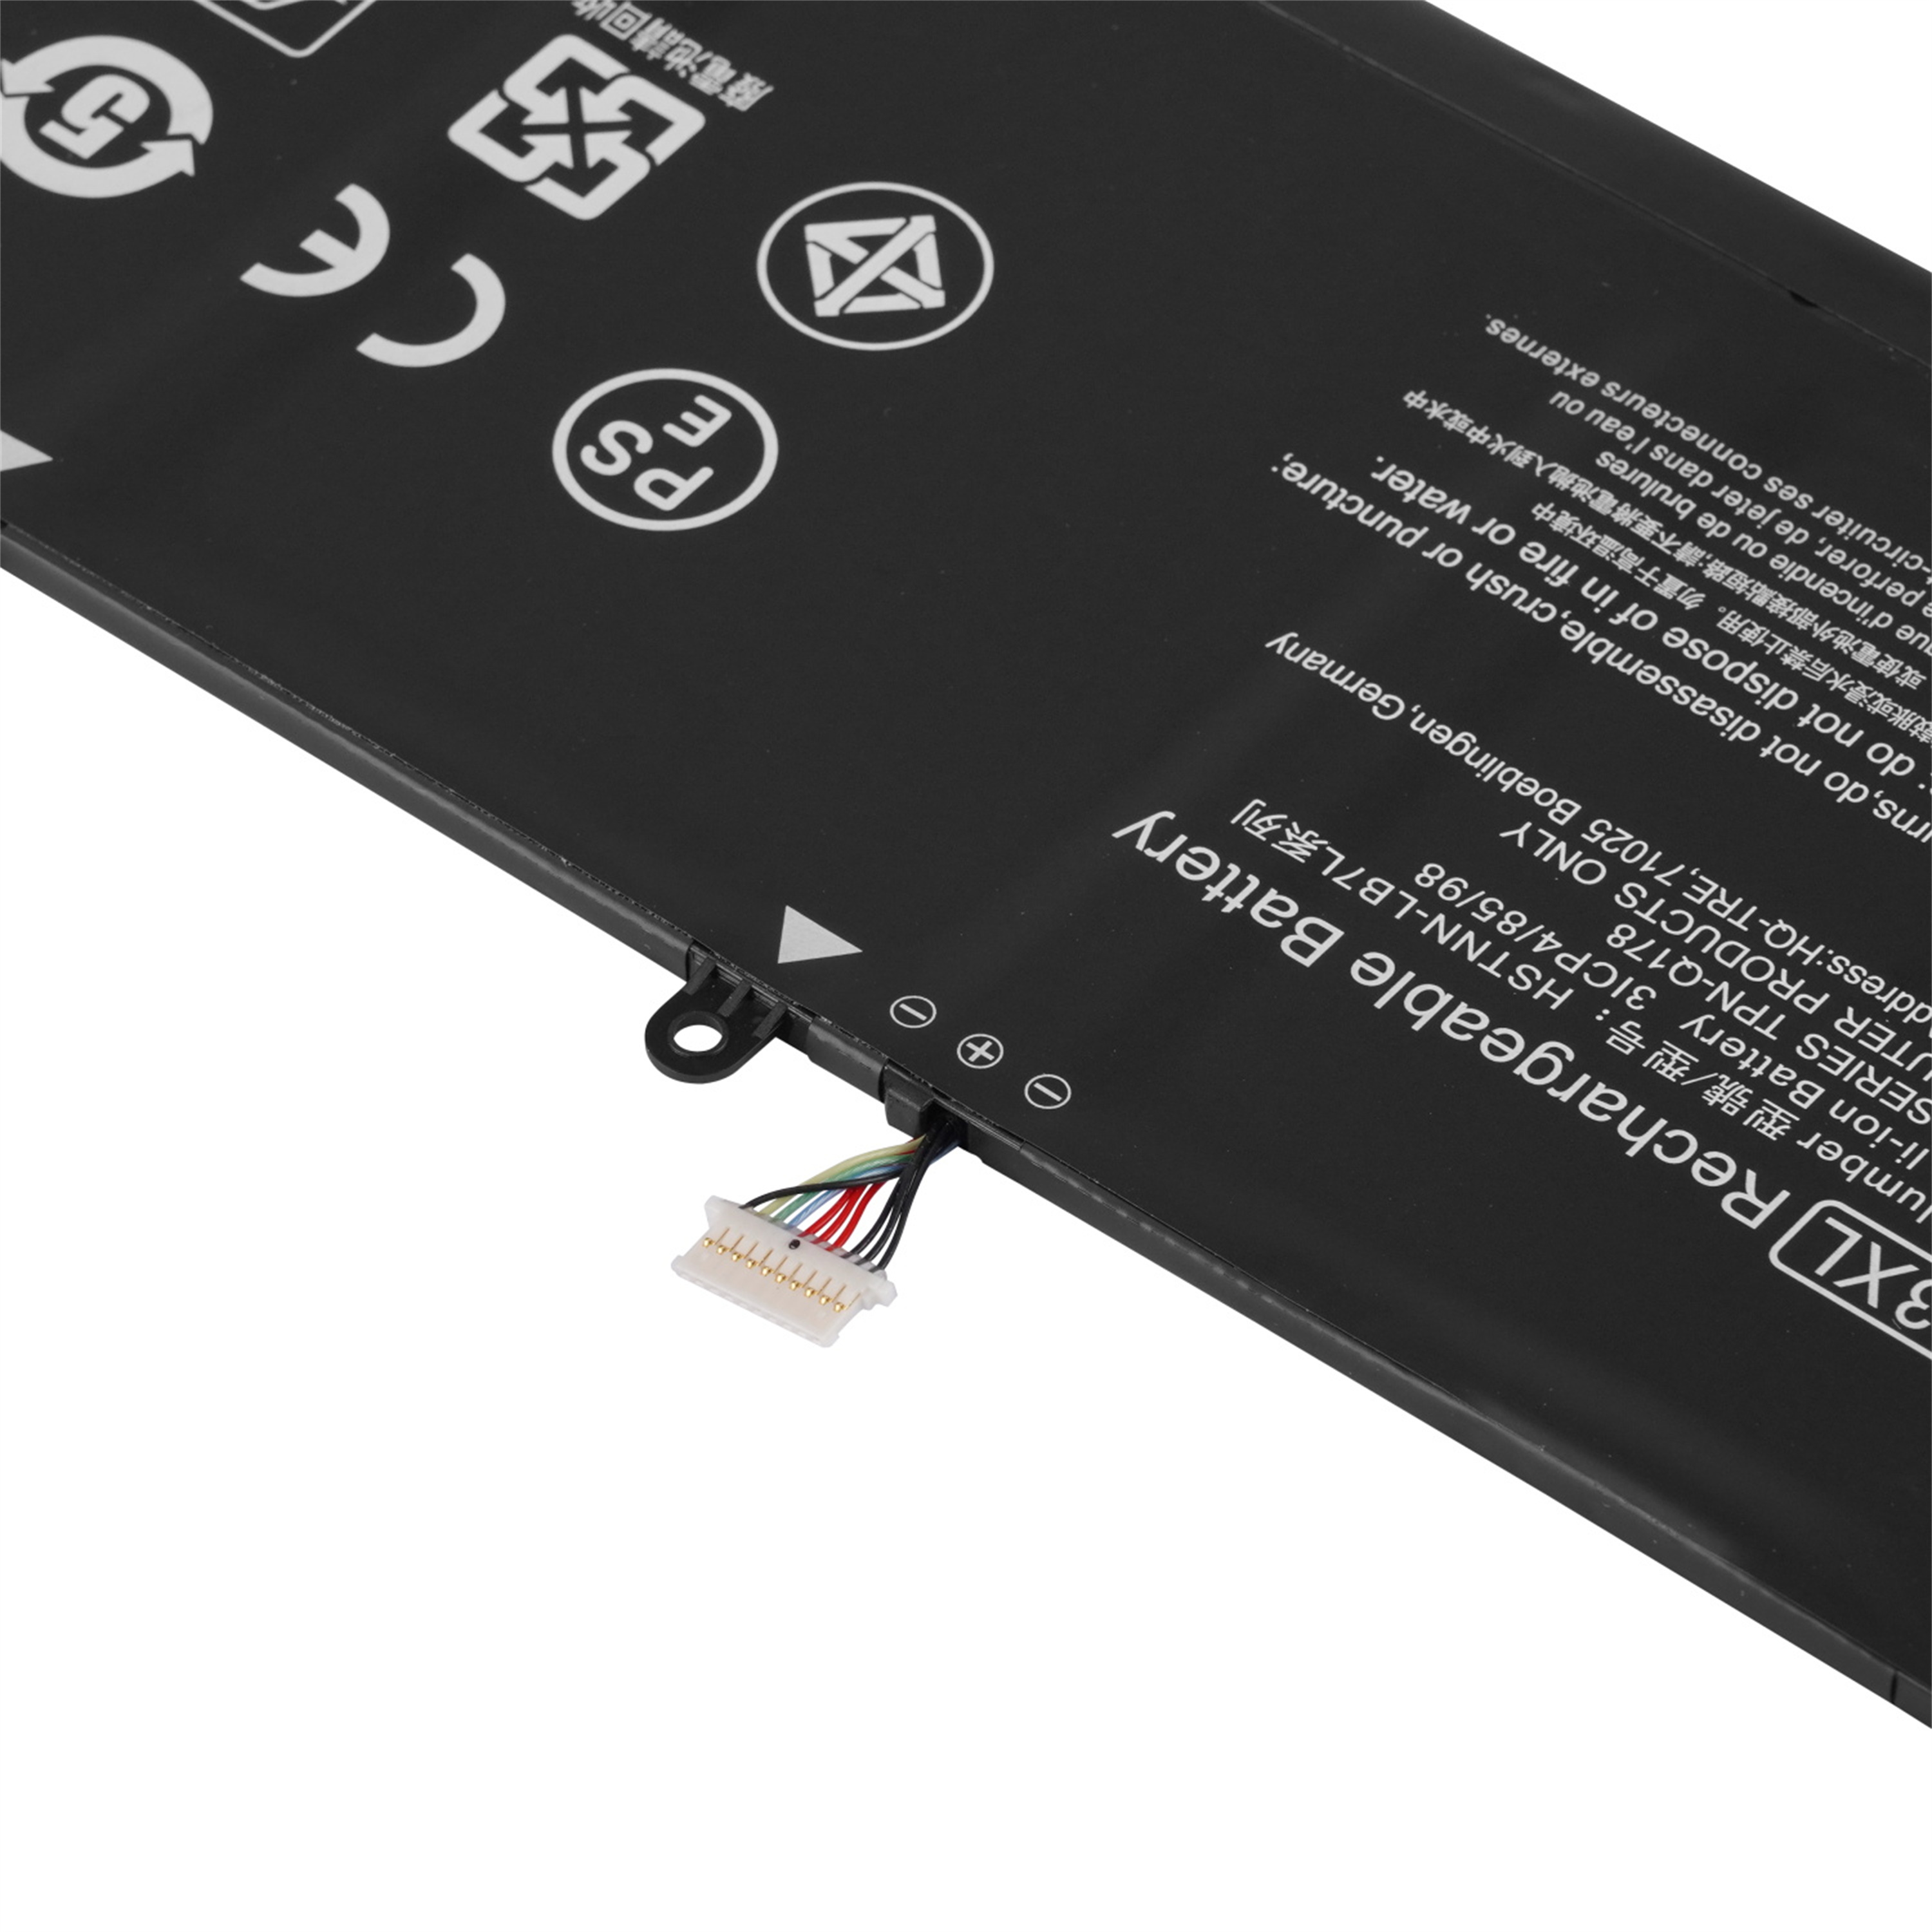 SH03XL rechargeable lithium ion Notebook battery Laptop battery For HP Spectre X360 13-W021TU 13-W022TU 13-W033ng 13-W0xx X360 13-AC015TU 13-AC013TU 11.55V 57.9Wh 5020mAh 3cell